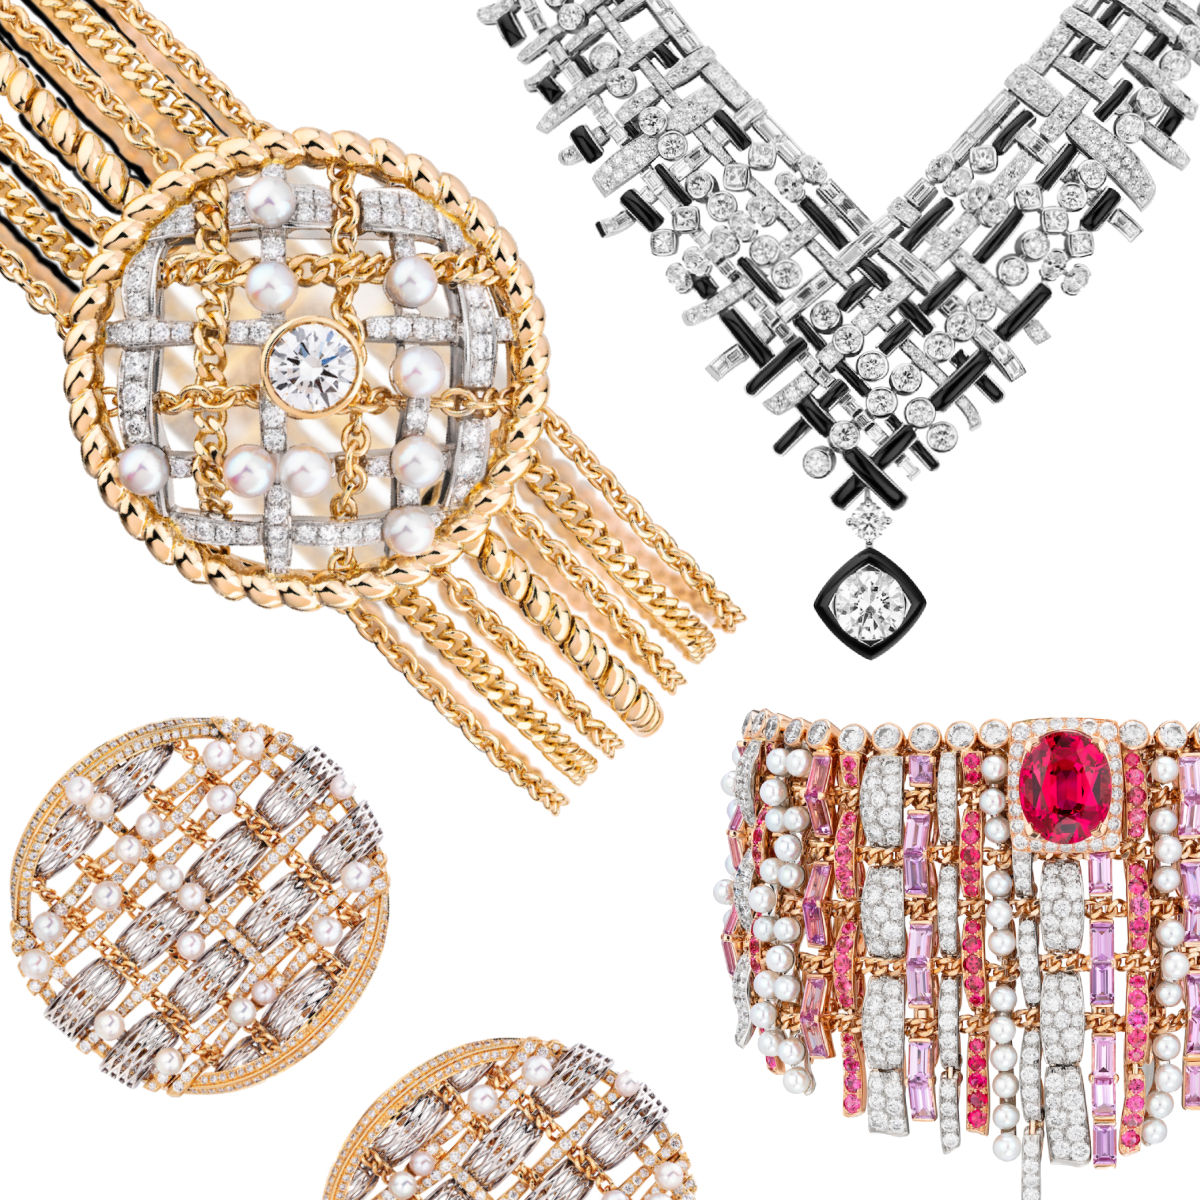 Chanel 'Tweed de Chanel' new fine jewellery collection